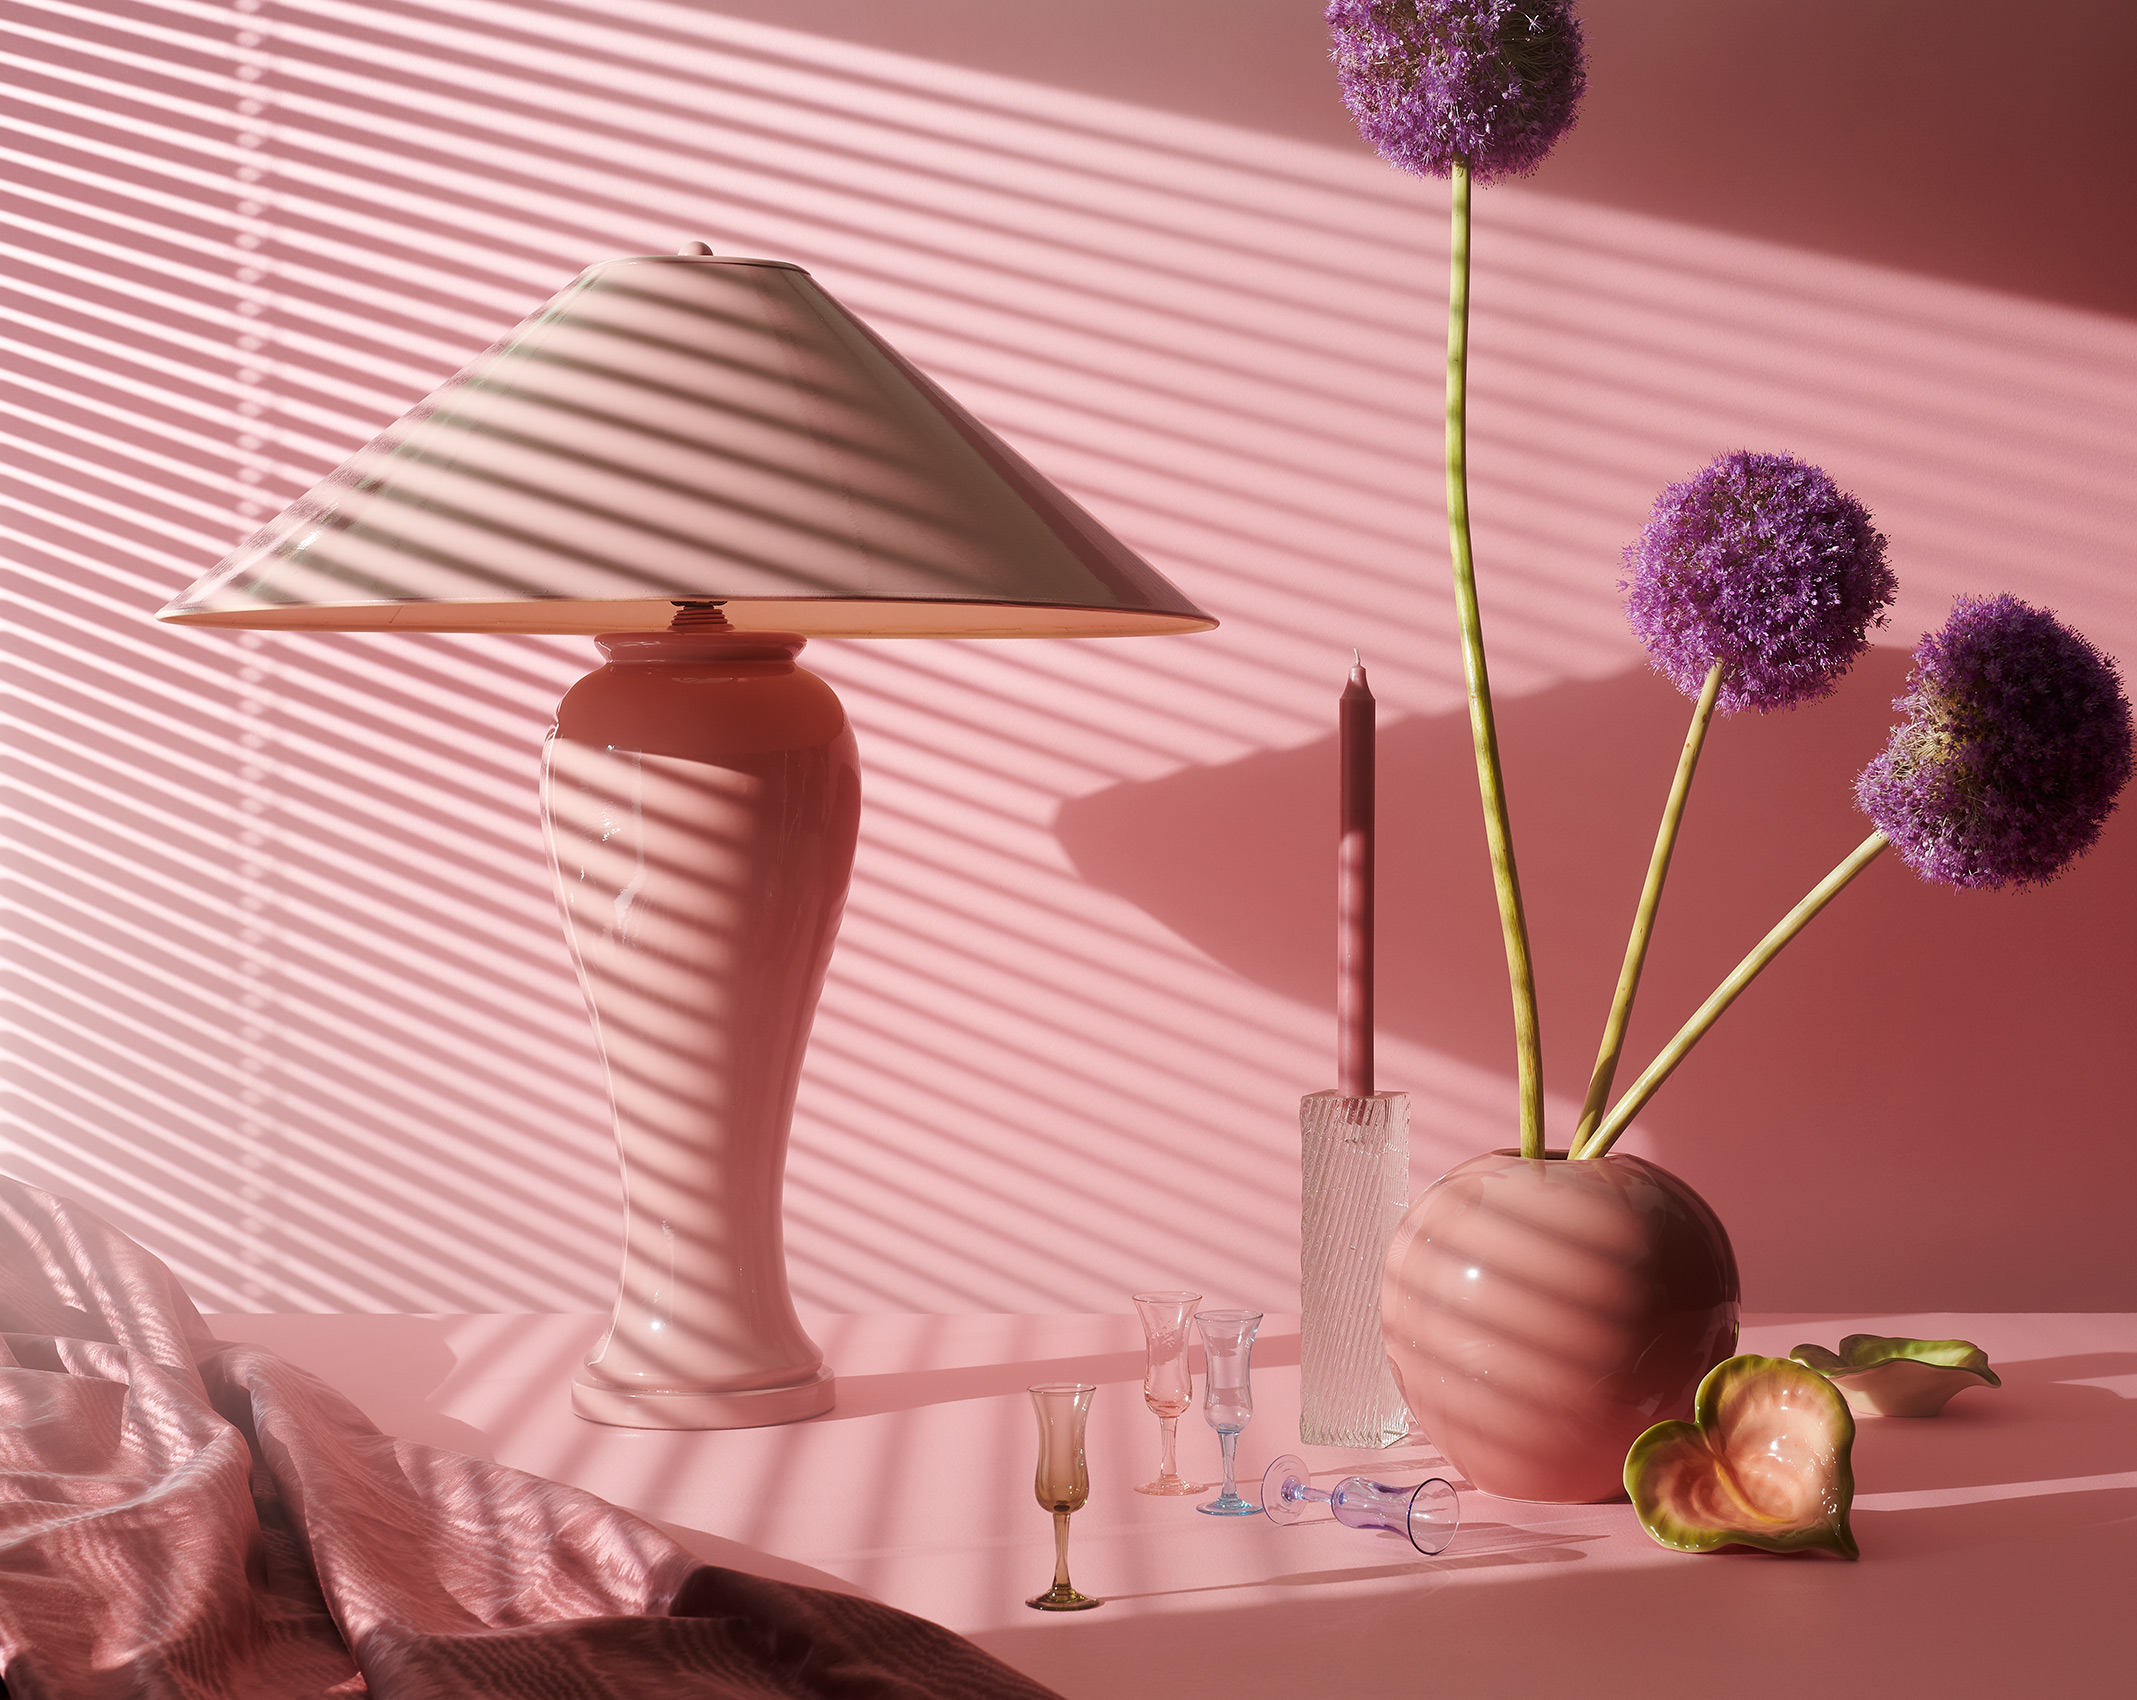 2020_07_Ronnie_80s_pink_lamp_cropped